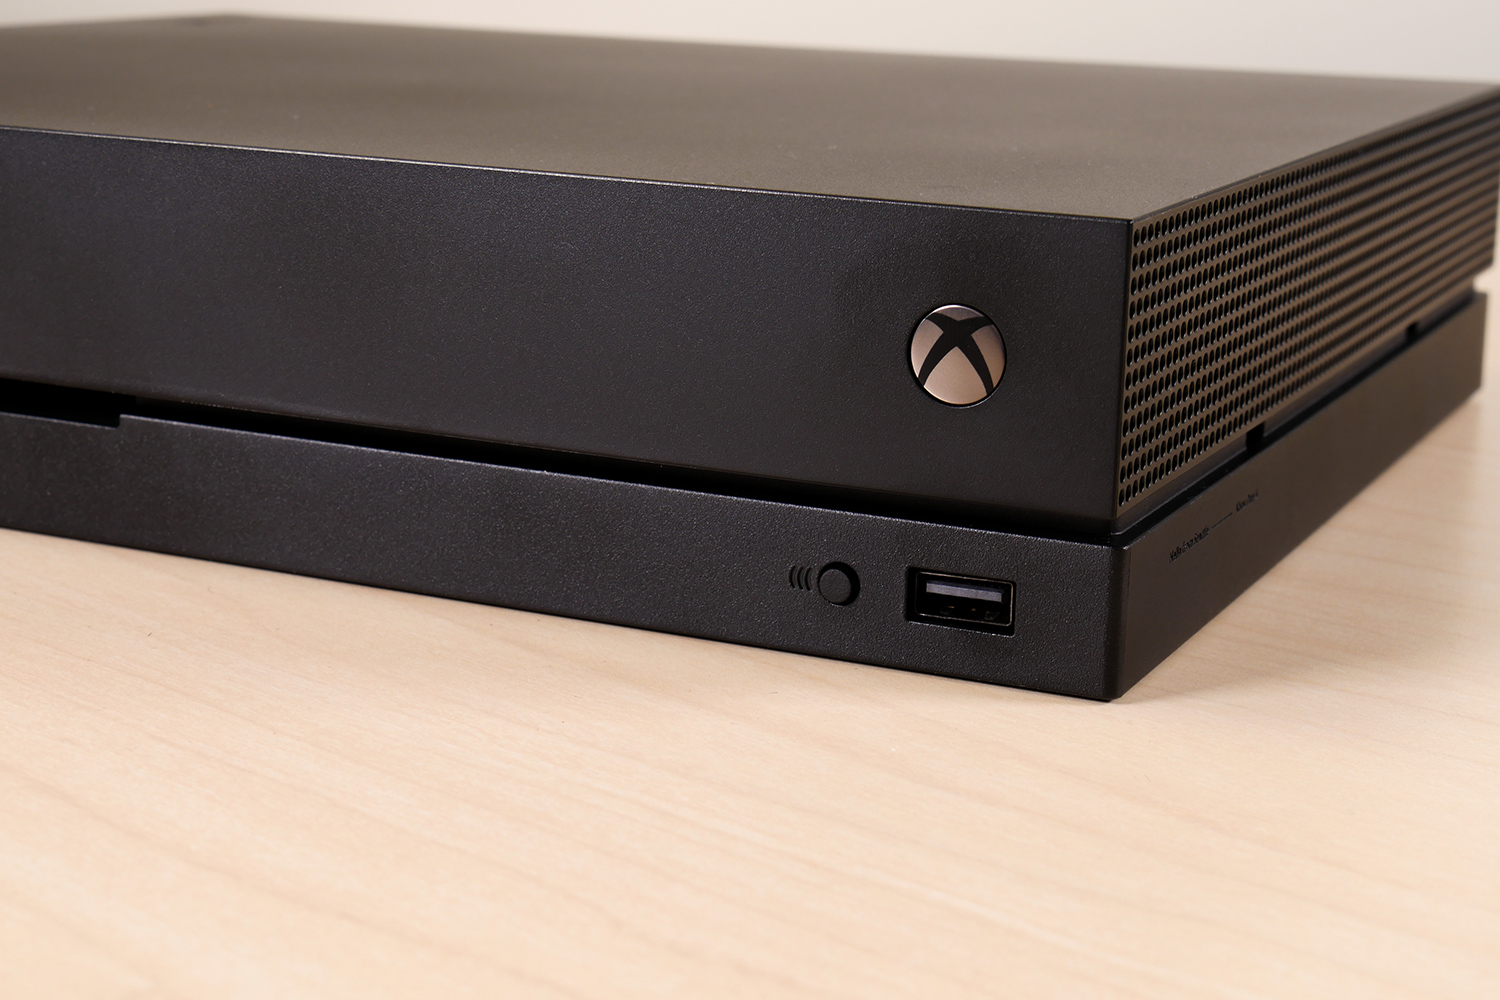 Xbox Series X is Microsoft's next-gen console, arriving late-2020